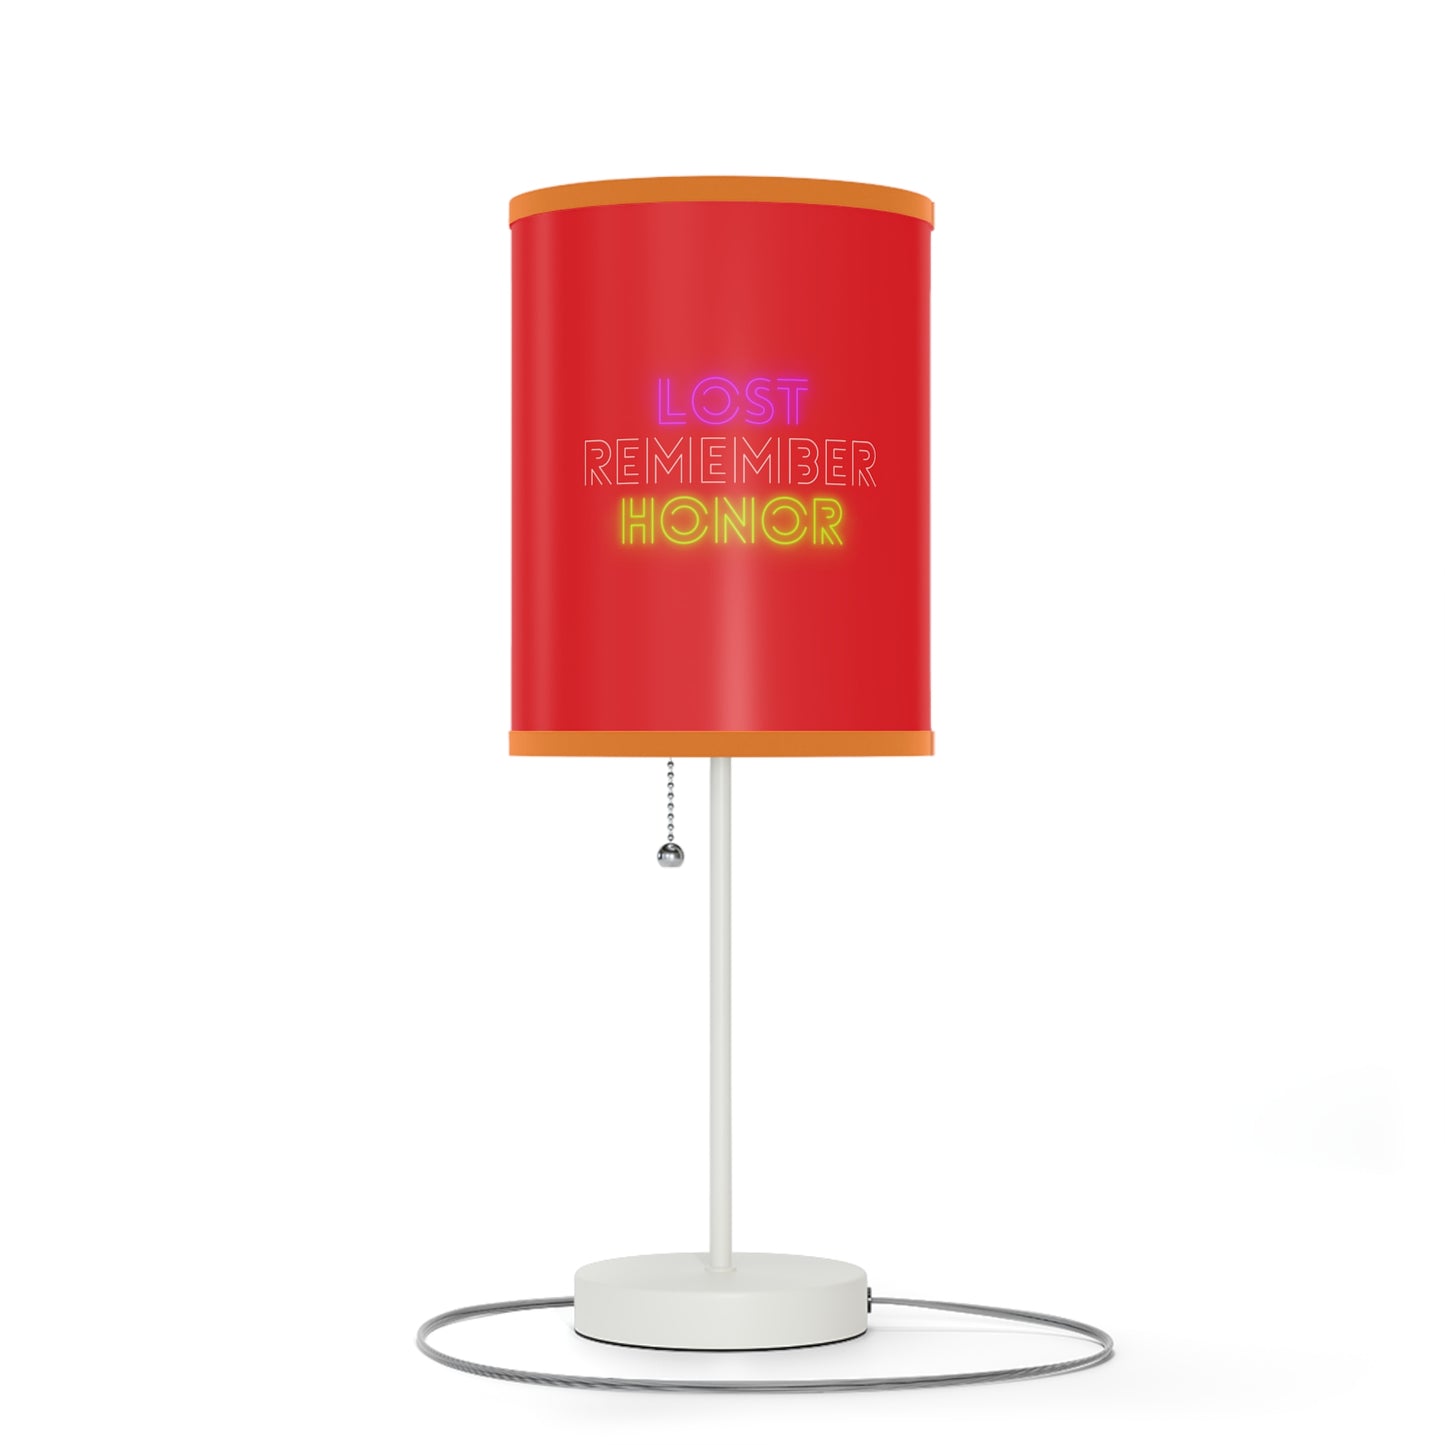 Lamp on a Stand, US|CA plug: Football Red